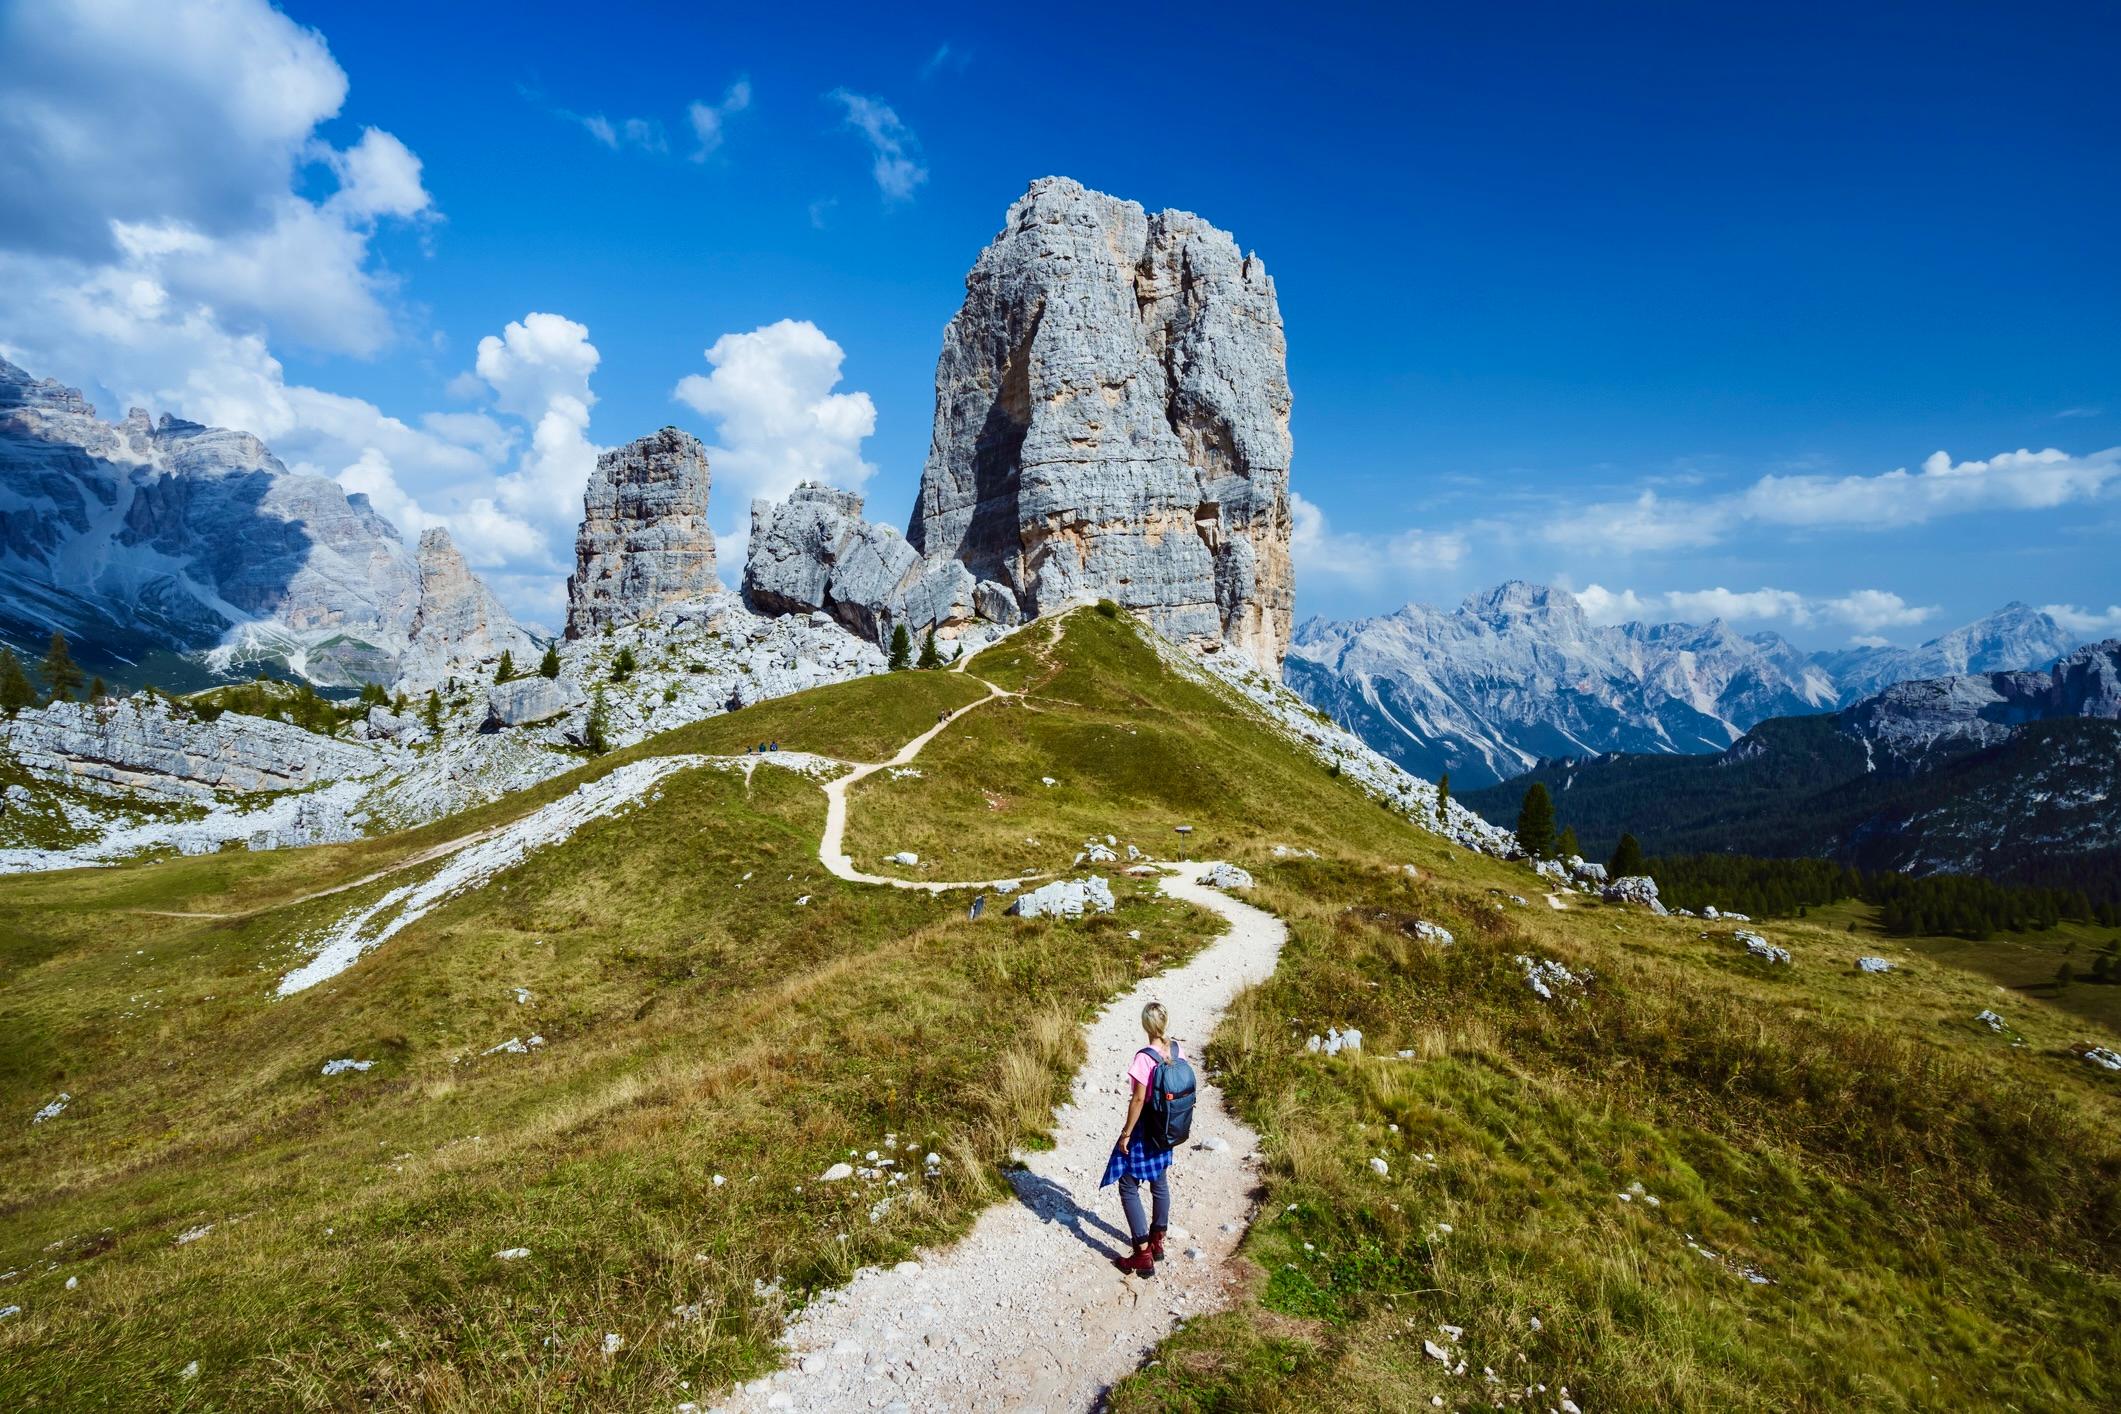 A hiker gazes at the Cinque Torri, in Italy's Dolomites National Park